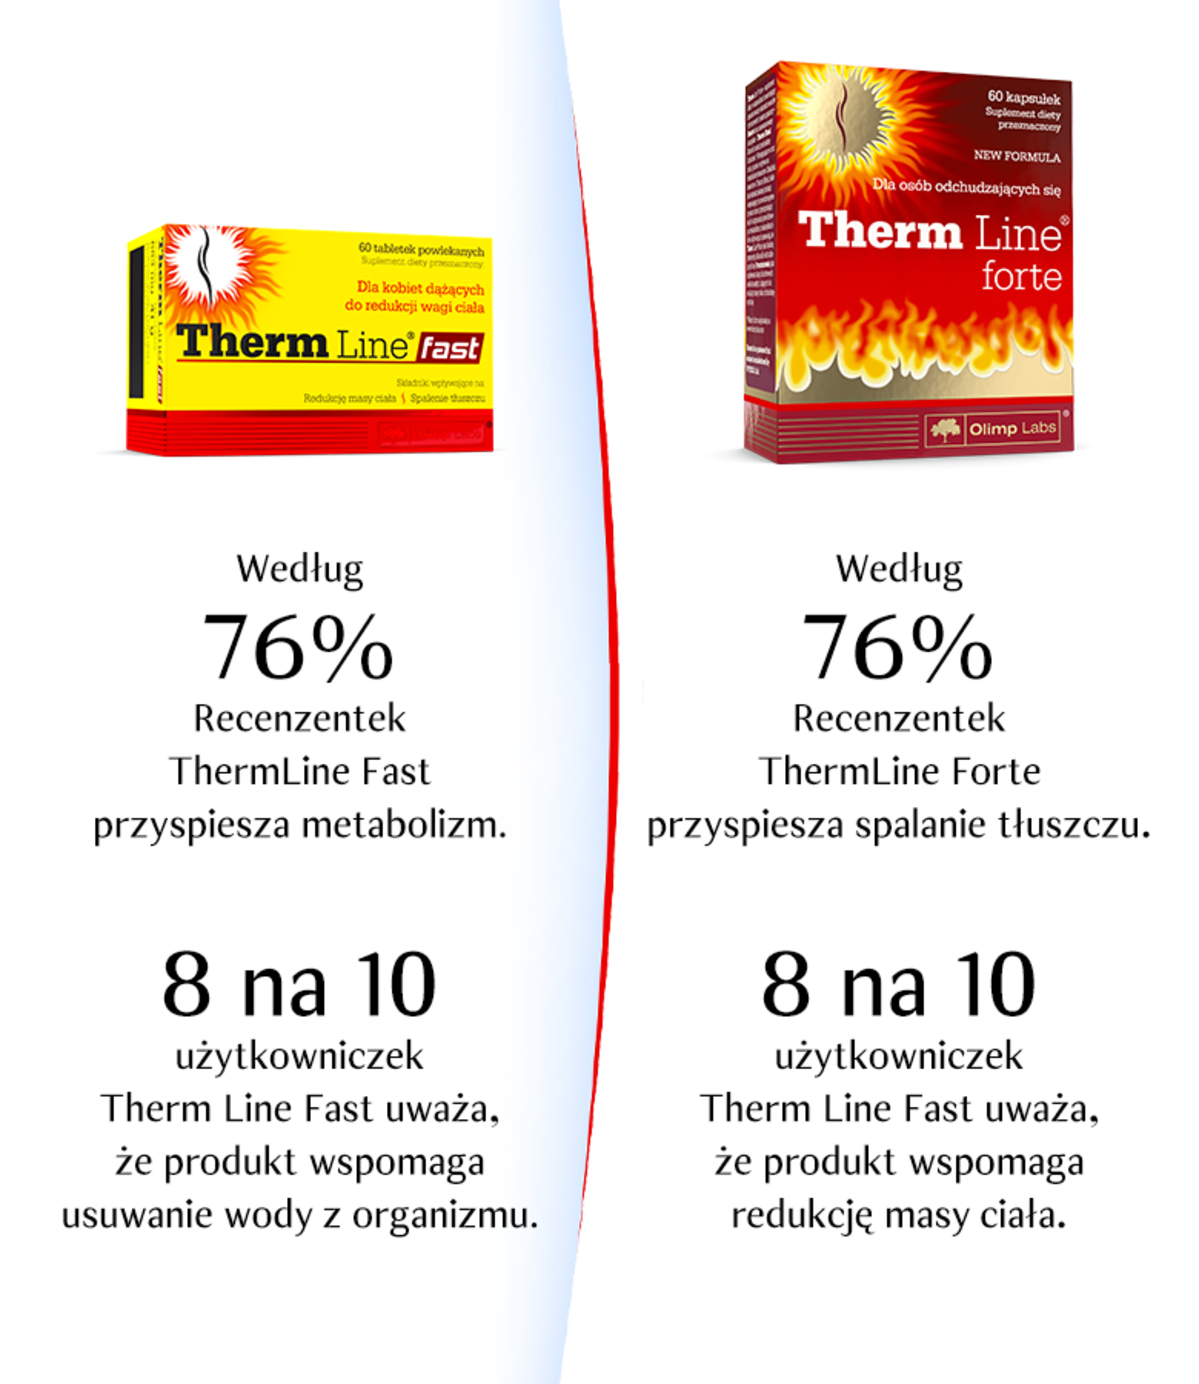 Therm Line - test 